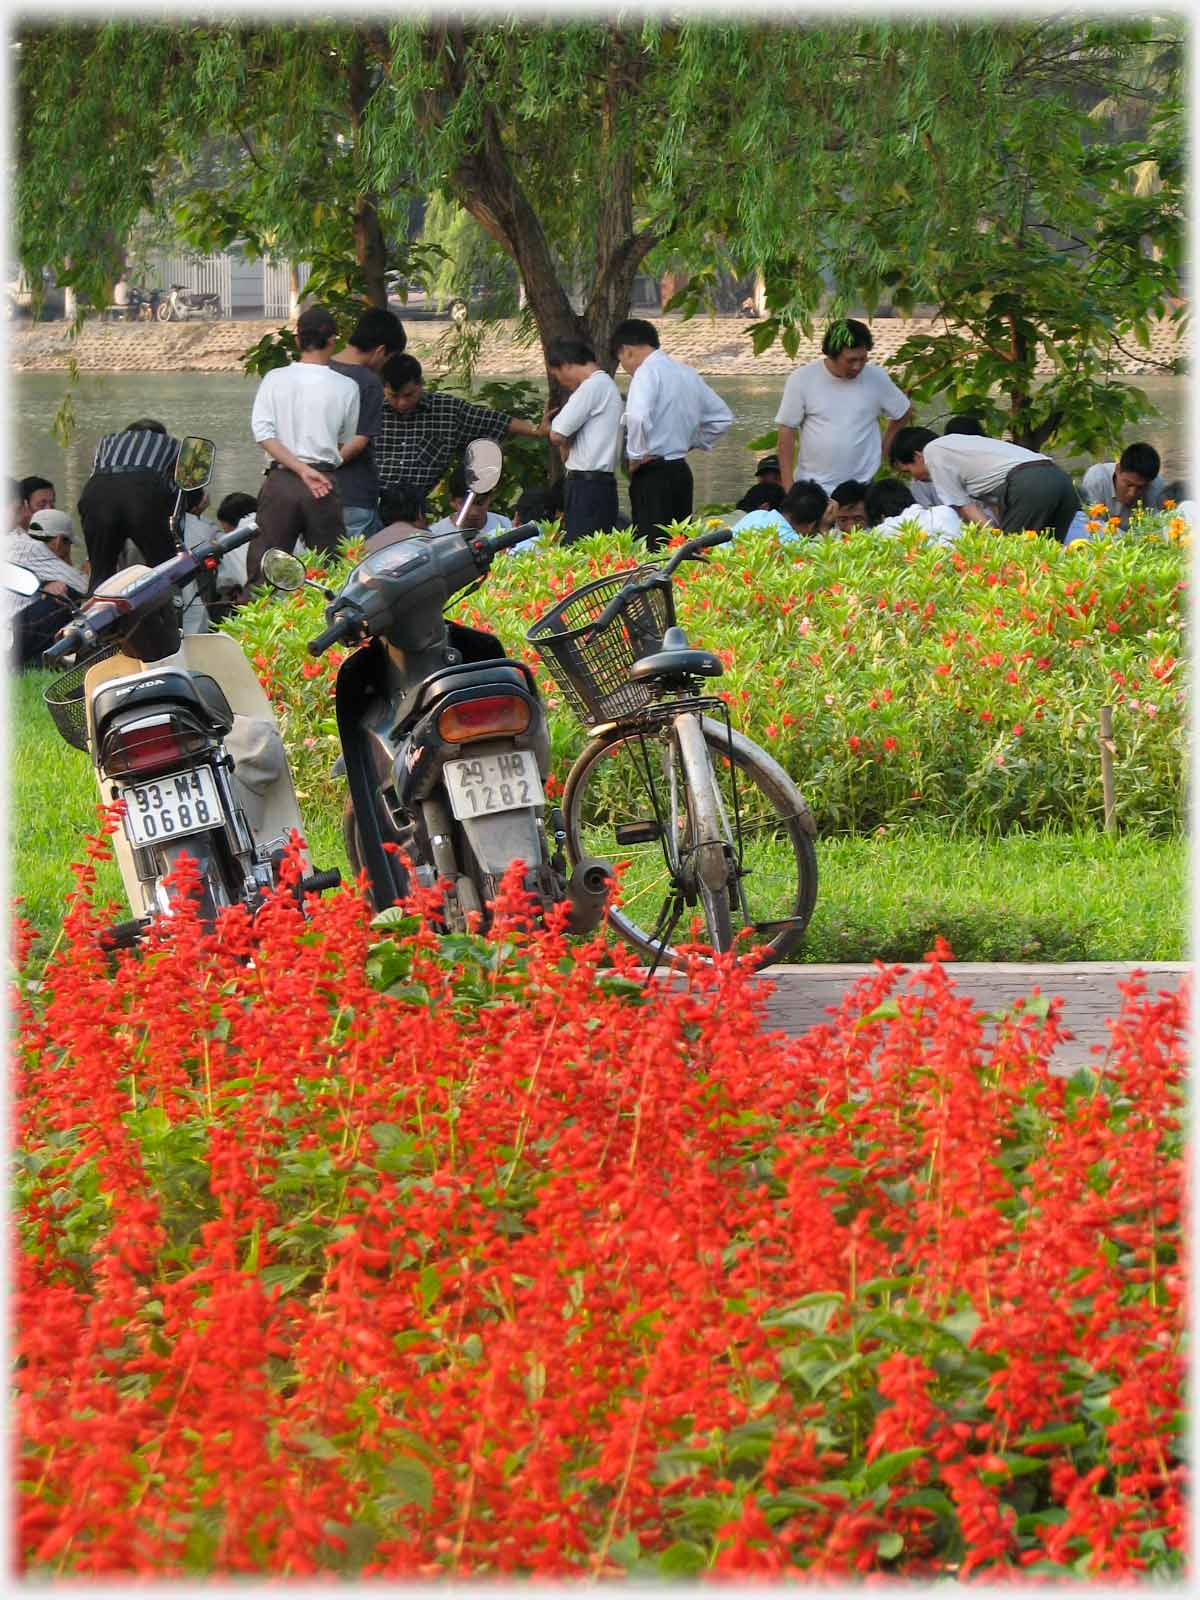 Flower border with parked bikes and people beyond.